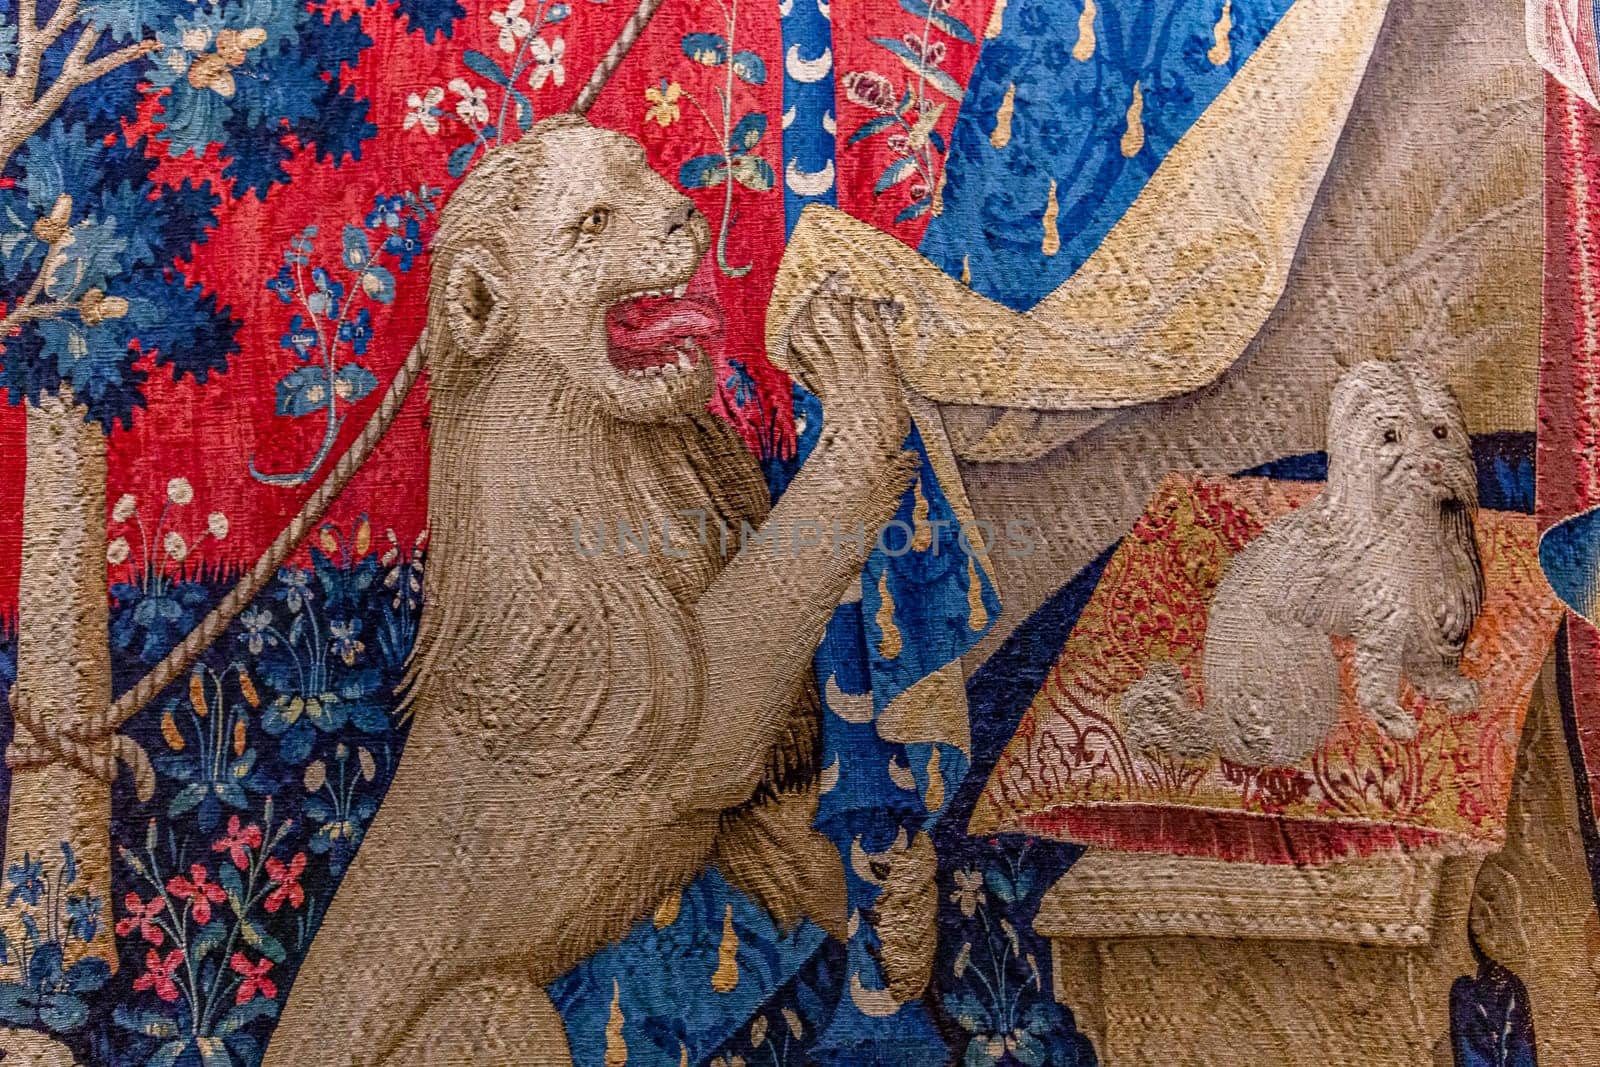 The lady and the unicorn tapestry, Cluny chapel, Paris, France by photogolfer